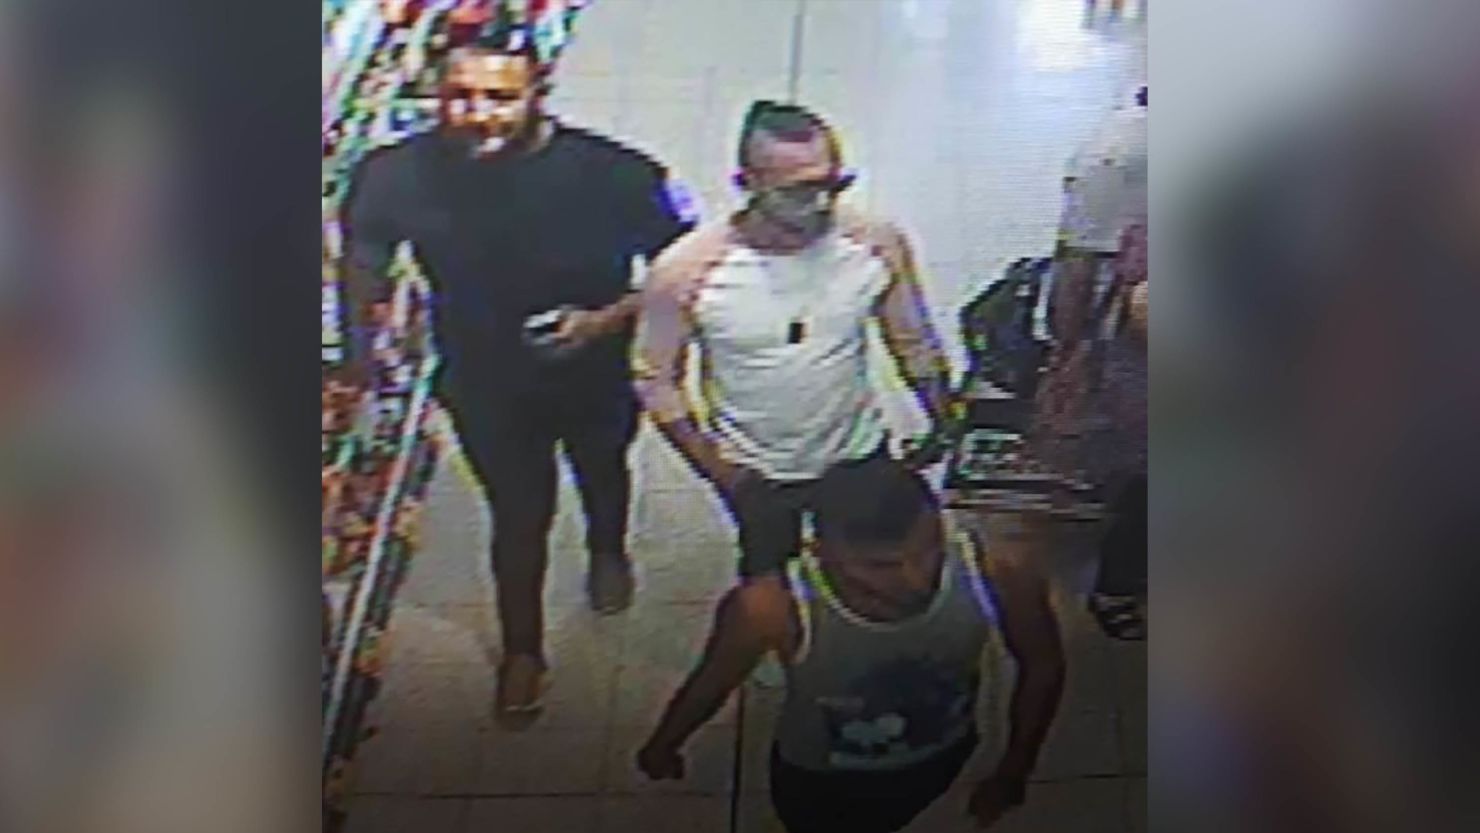 Police released security camera images of suspects in the acid attack on the 3-year-old boy in July 2018.